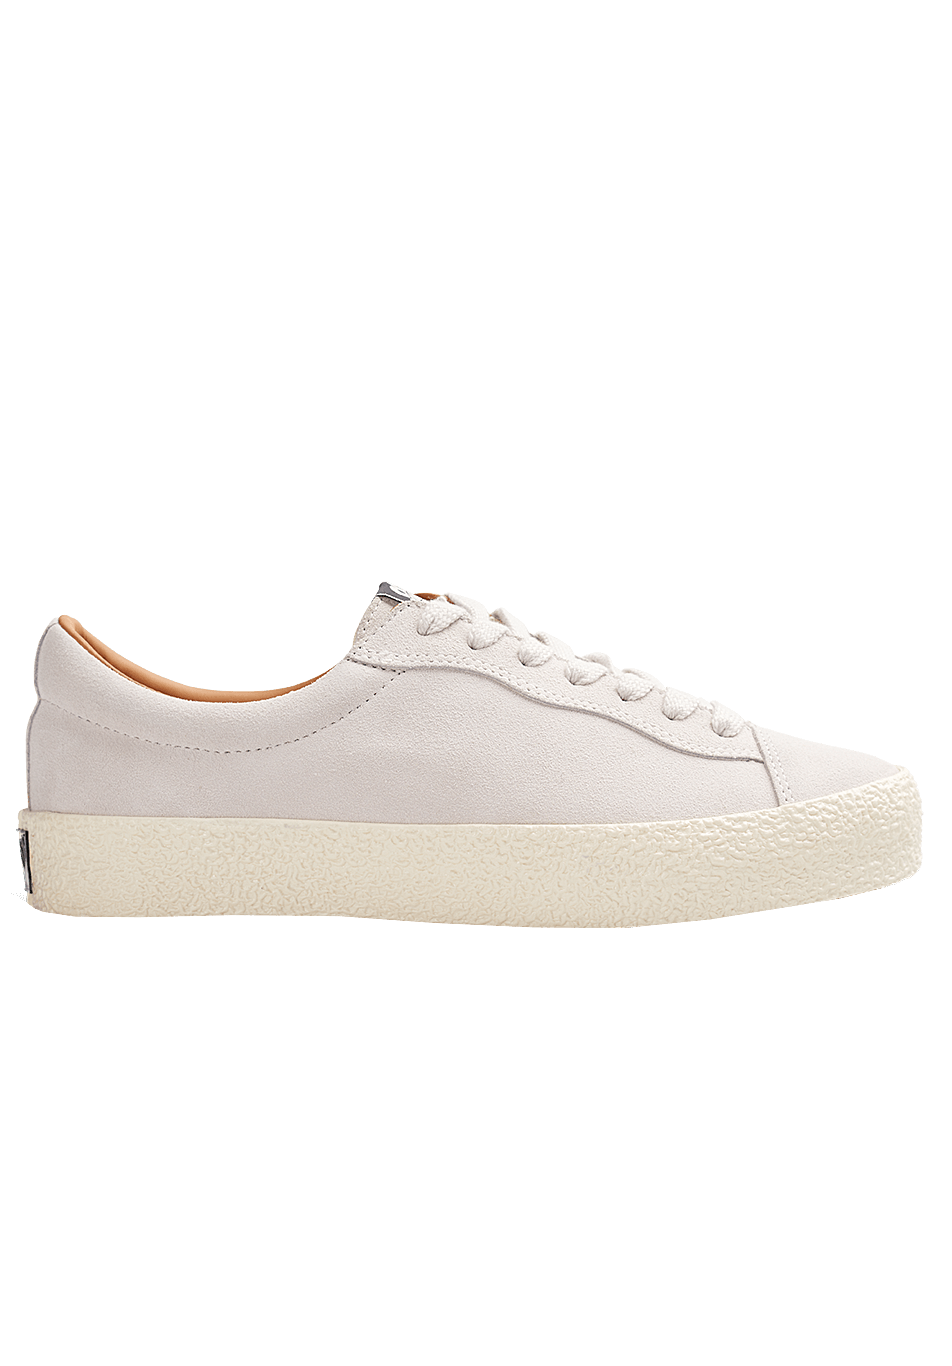 Last Resort AB VM002 Suede Lo All White ONLINE ONLY